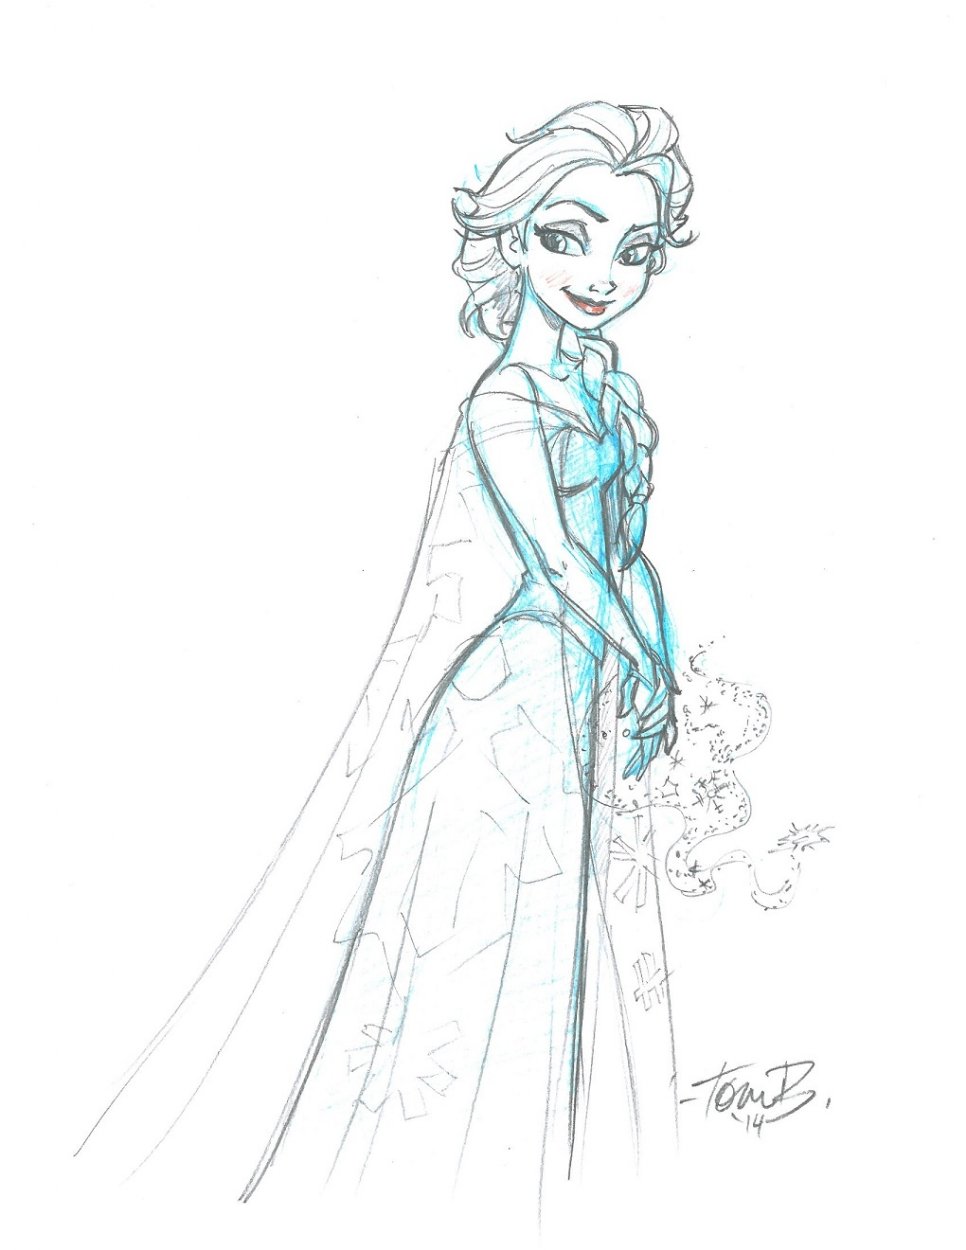 How to Draw Disneys Frozen Cartoon Characters  Drawing Tutorials  Drawing   How to Draw Disneys Frozen Illustrations Drawing Lessons Step by Step  Techniques for Cartoons  Illustrations